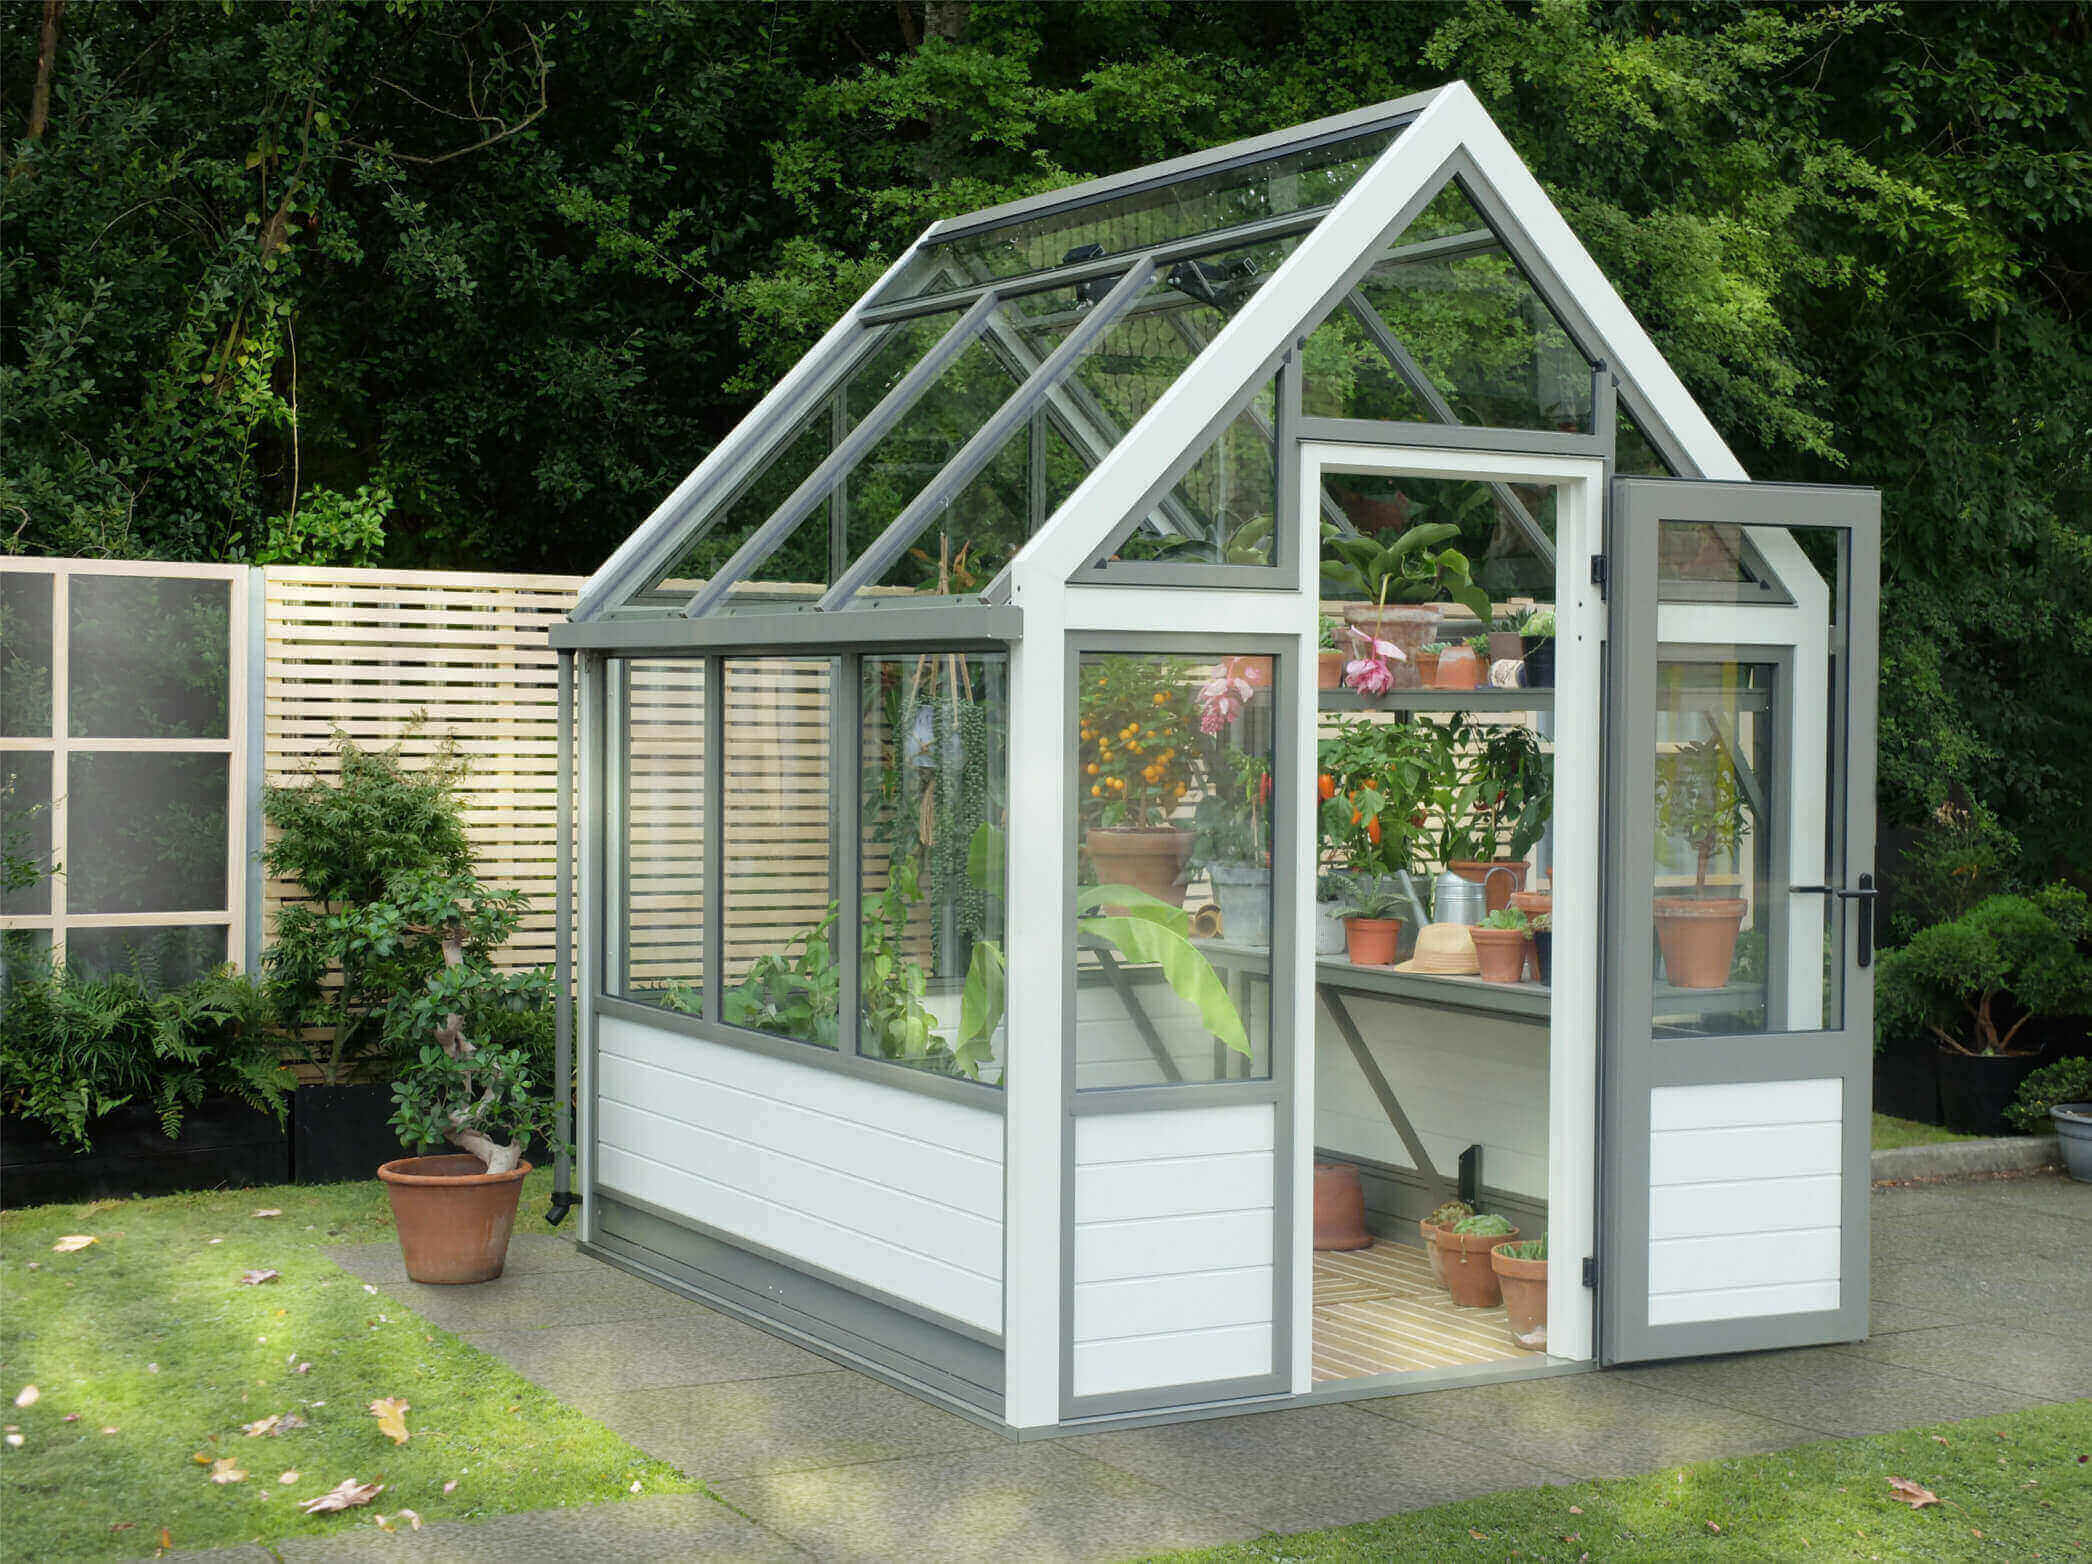  Small  Greenhouses  Buy a Compact Small  Greenhouse 